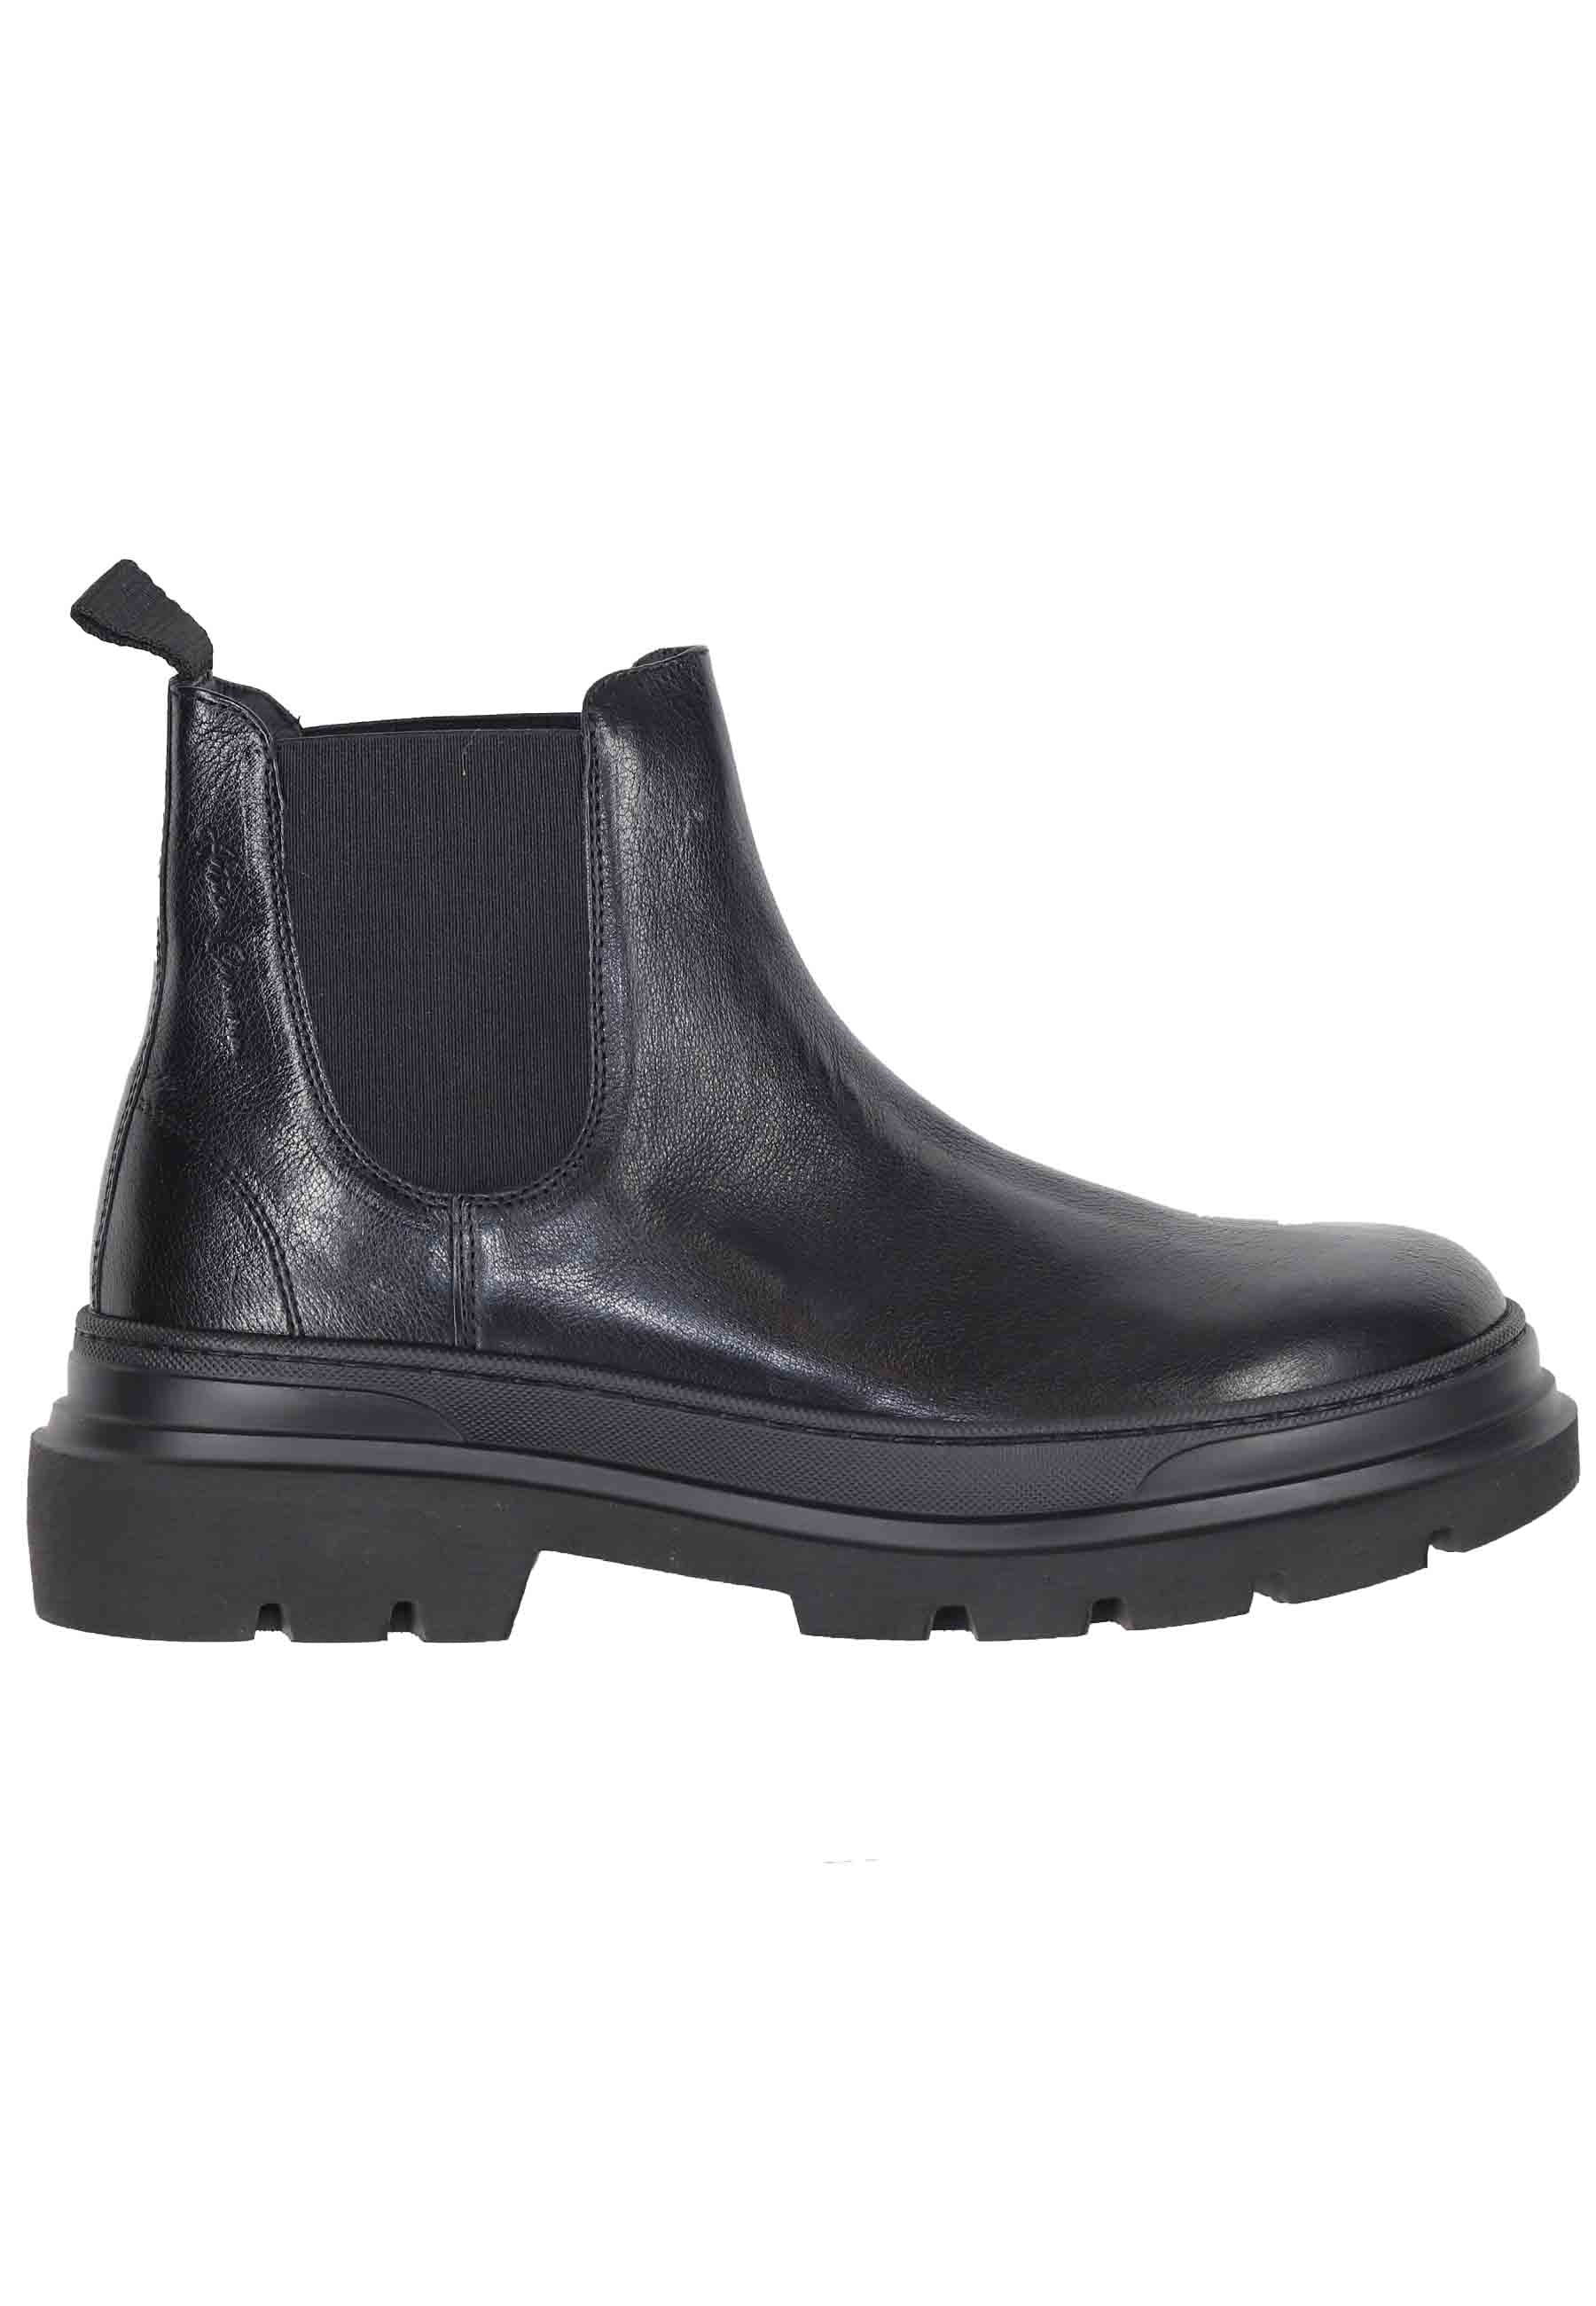 Men's Beatles ankle boots in black leather with lug sole